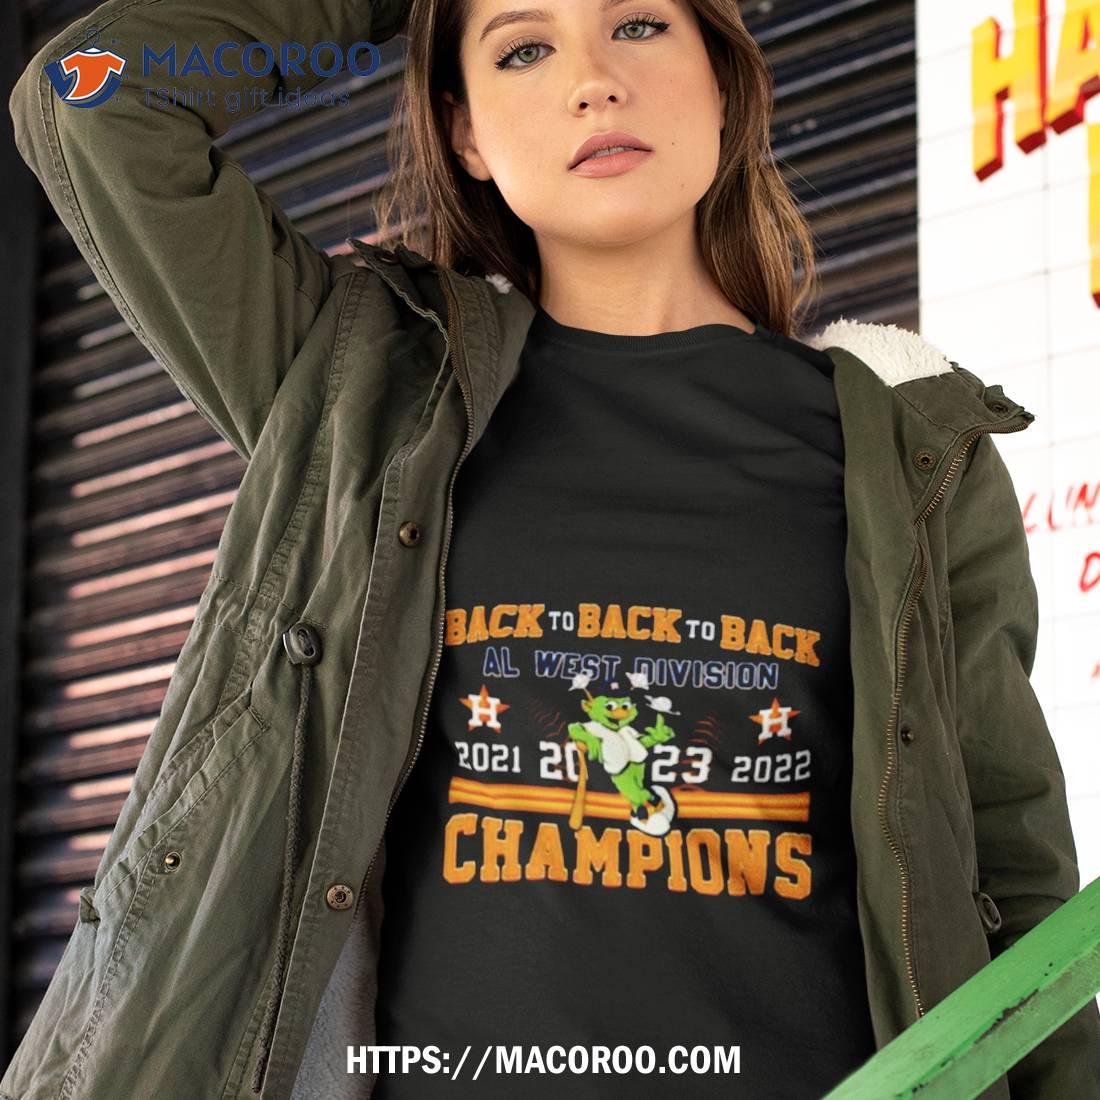 Official Back 2 Back 2 Back AL West Division 2021 2022 2023 Champions  Houston Astros T-Shirt, hoodie, sweater, long sleeve and tank top